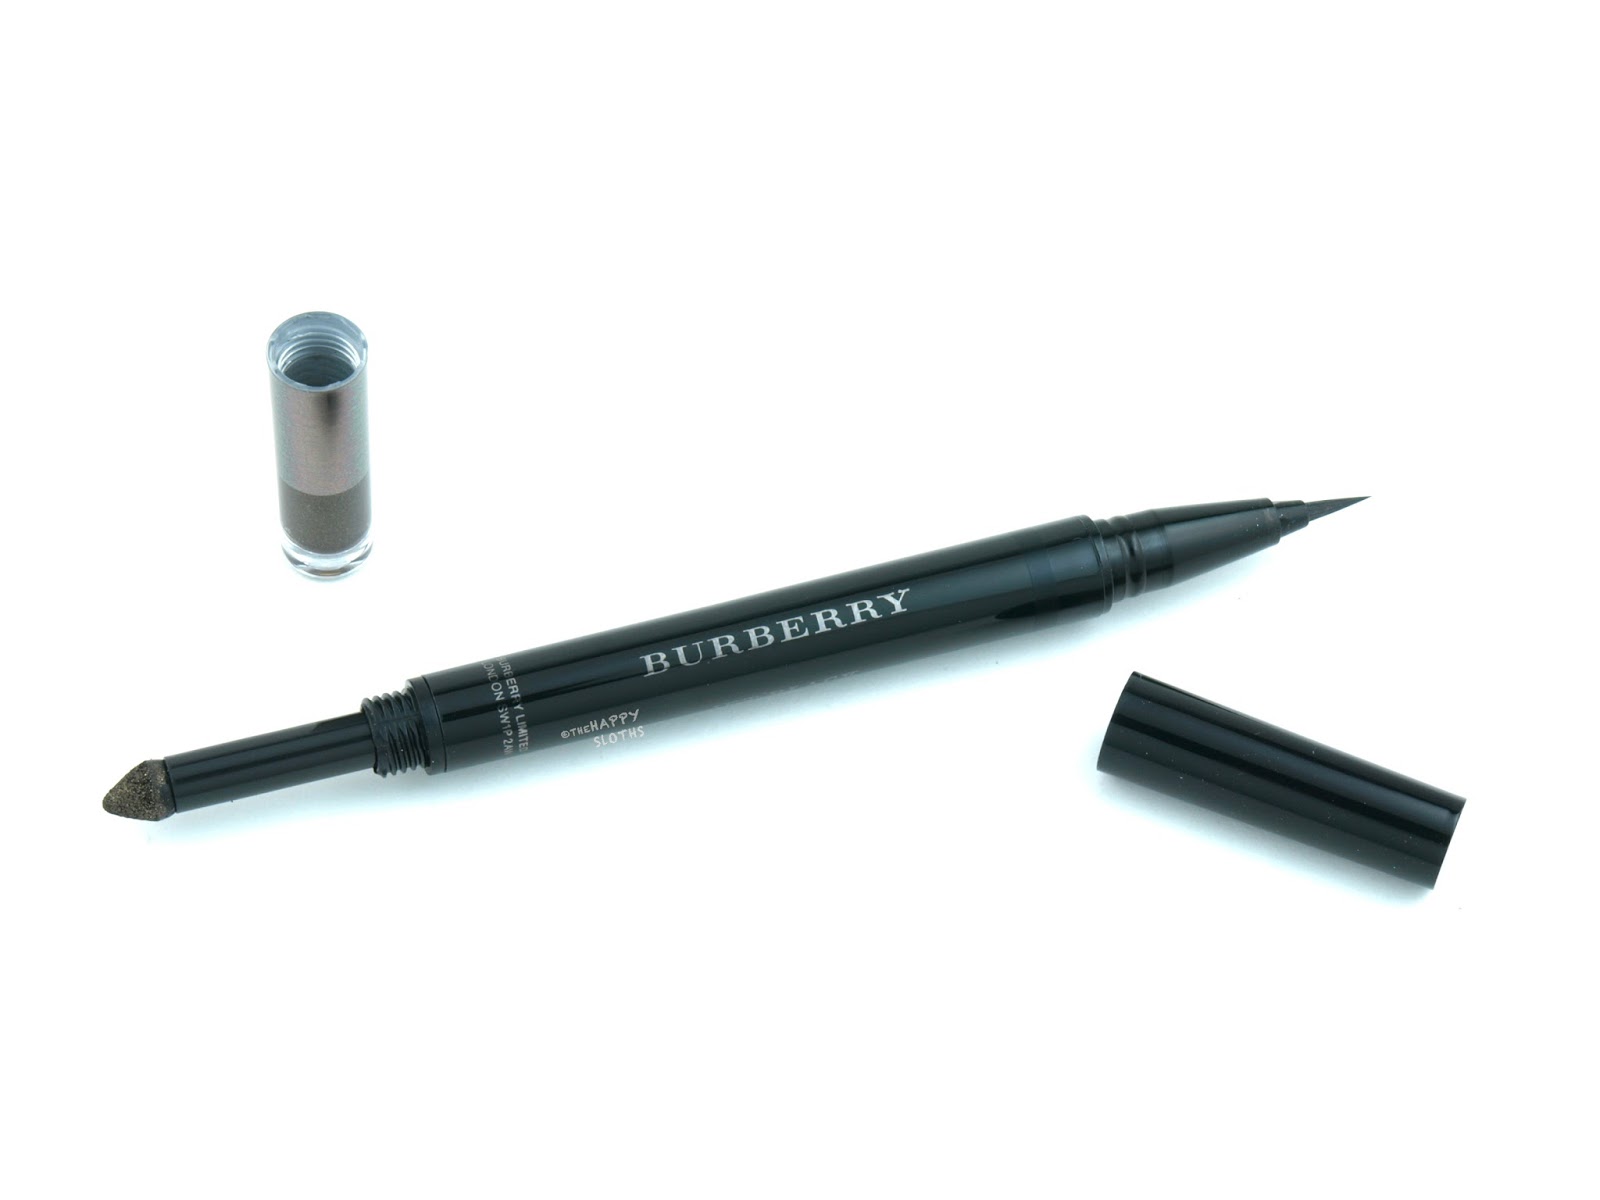 Burberry Cat Eye Liner: Review and Swatches